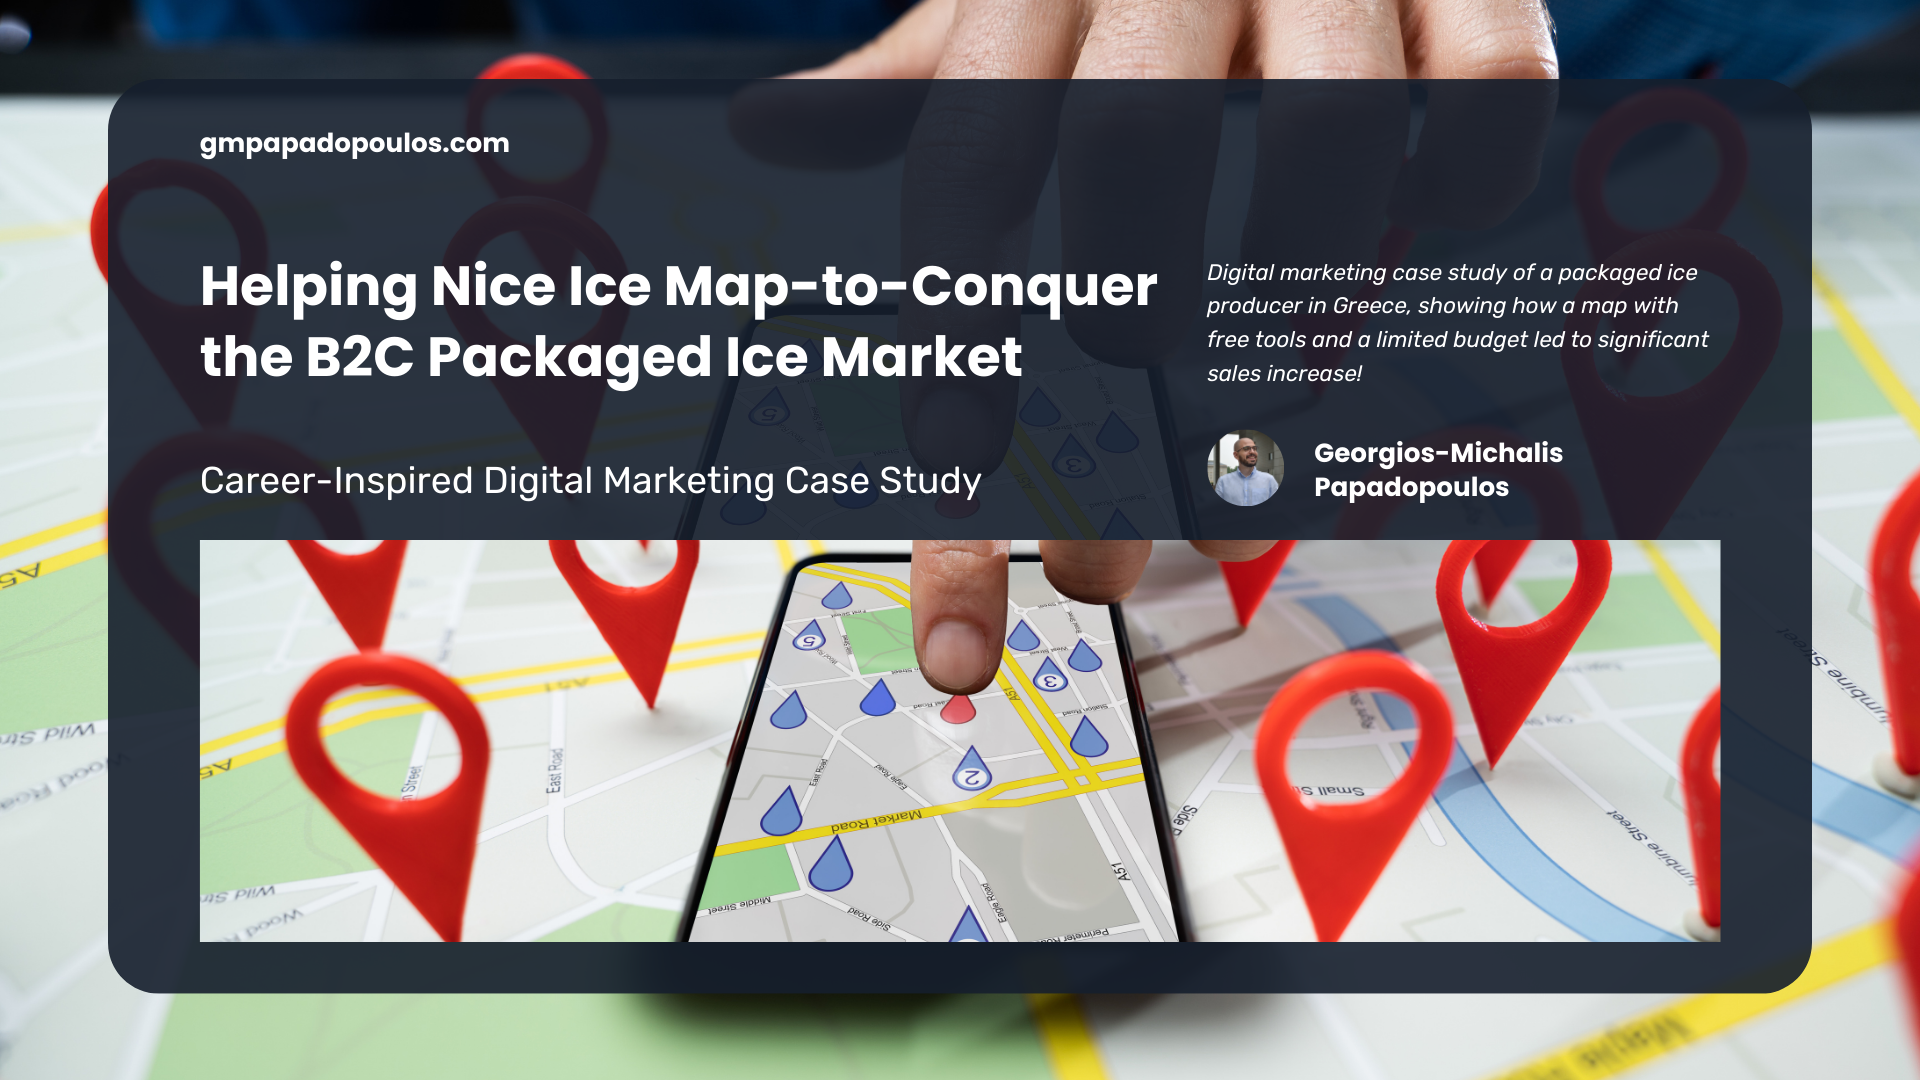 Helping Nice Ice Map-to-Conquer the B2C Packaged Ice Market